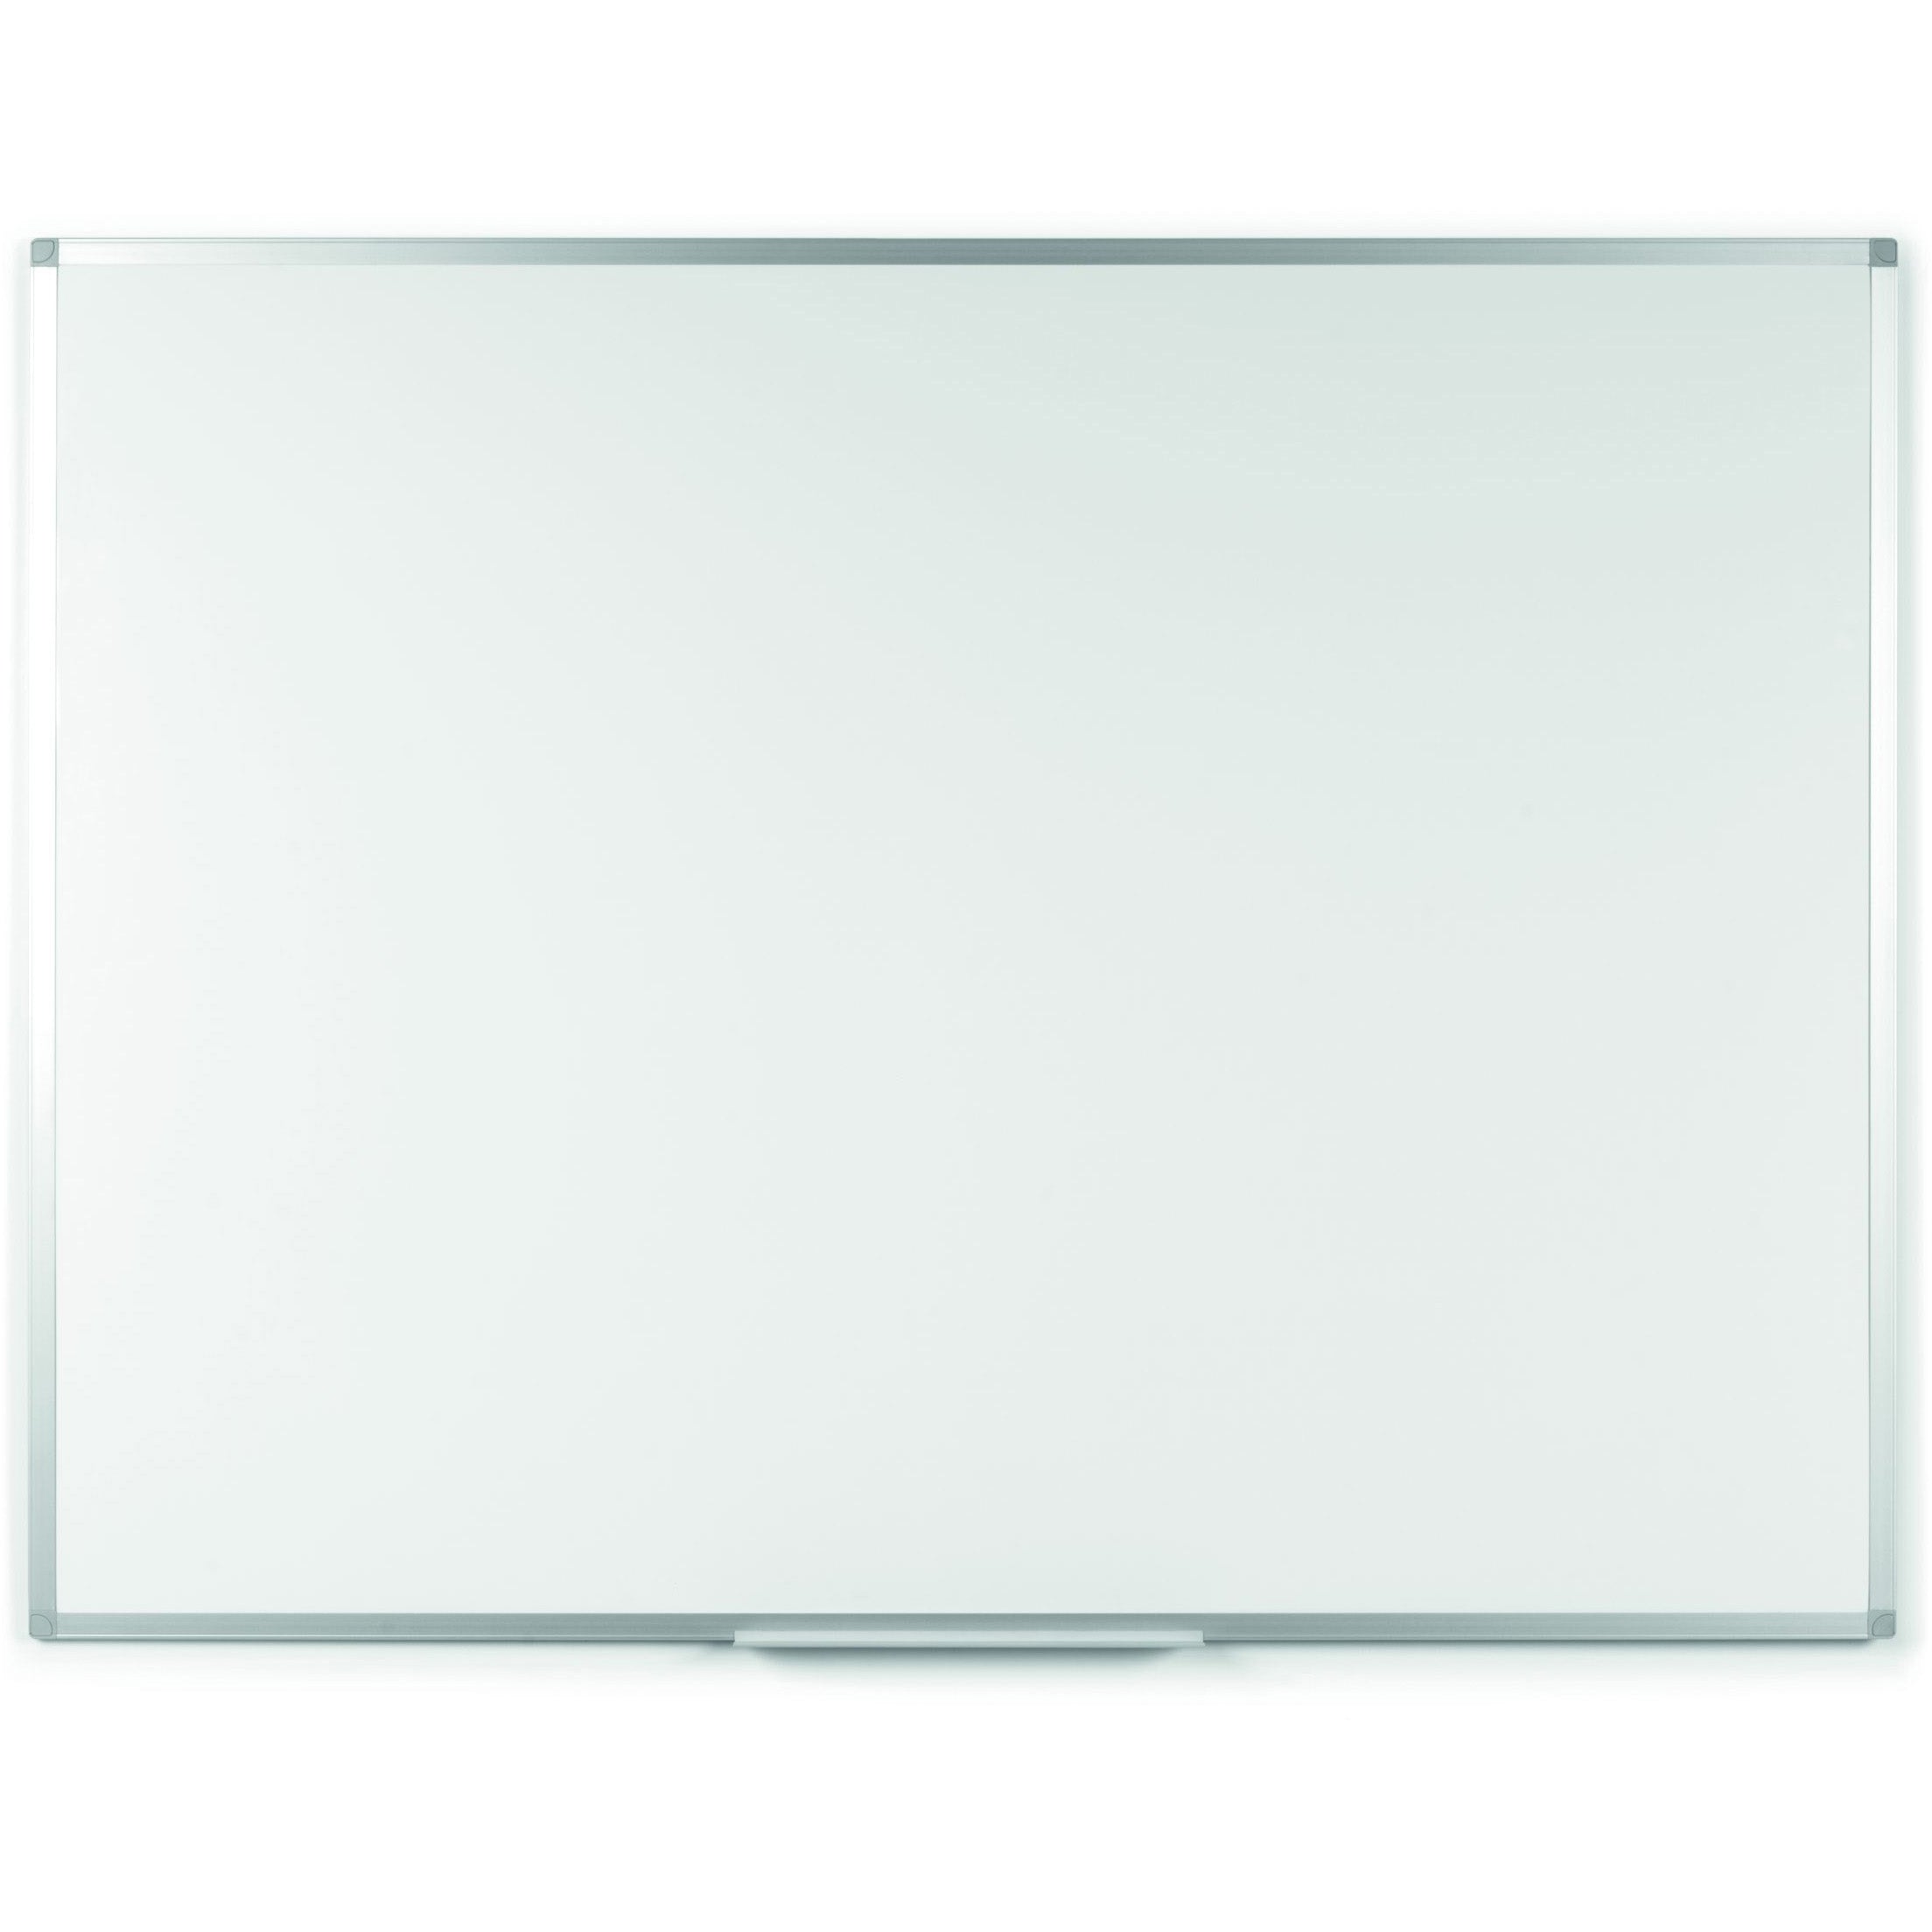 MA02759214 Ayda Magnetic Steel Dry Erase White Board, 18" x 24", Aluminum Frame, Wall Mounting Kit by MasterVision